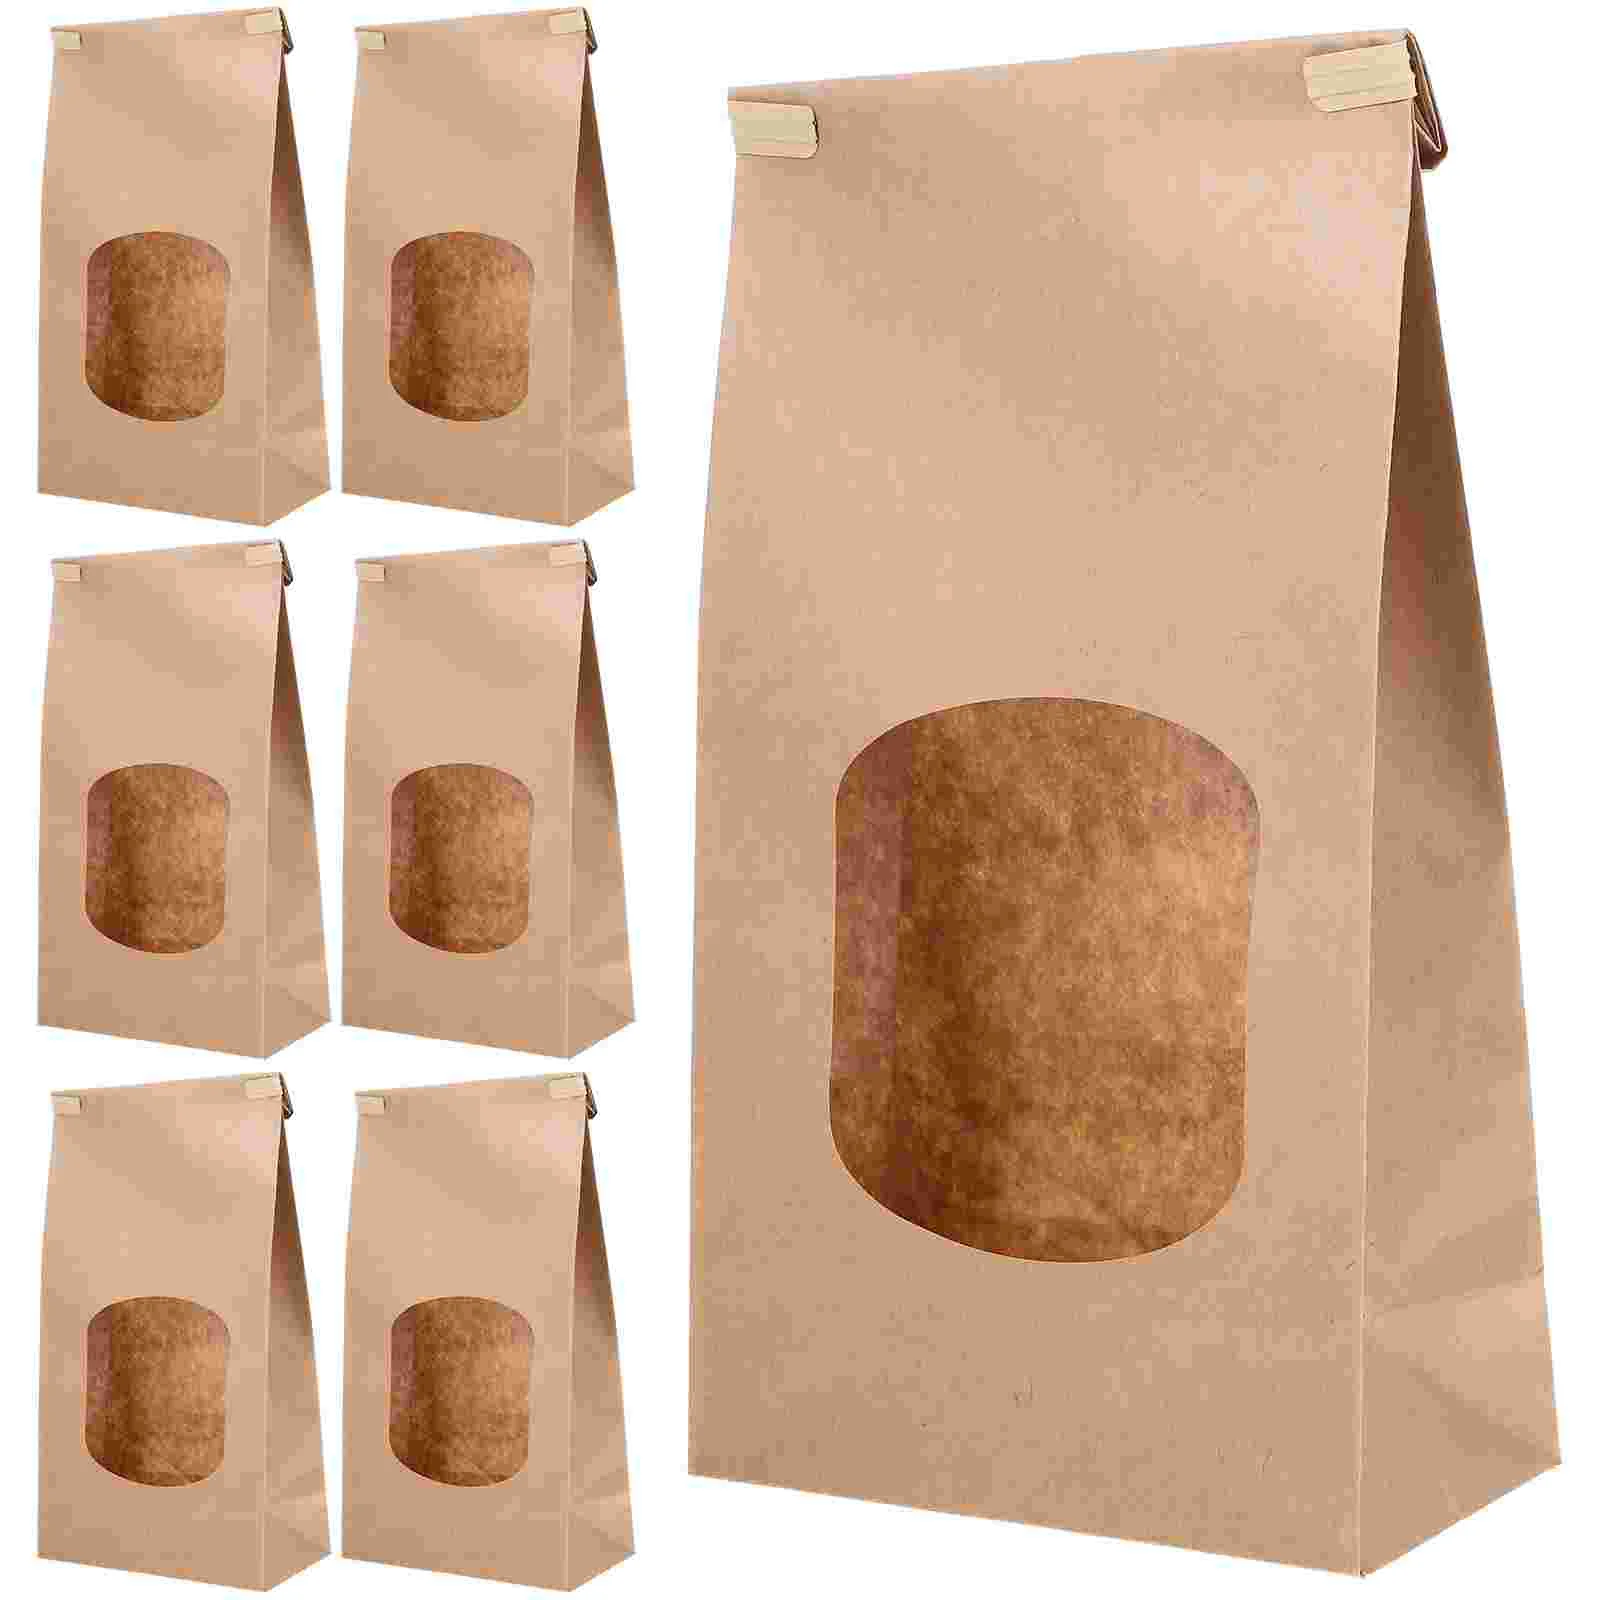 

50 Pcs Household Bread Bags Convenient Cookie Holders Treat Open The Window Baking Wrapping Pouches Kraft Paper